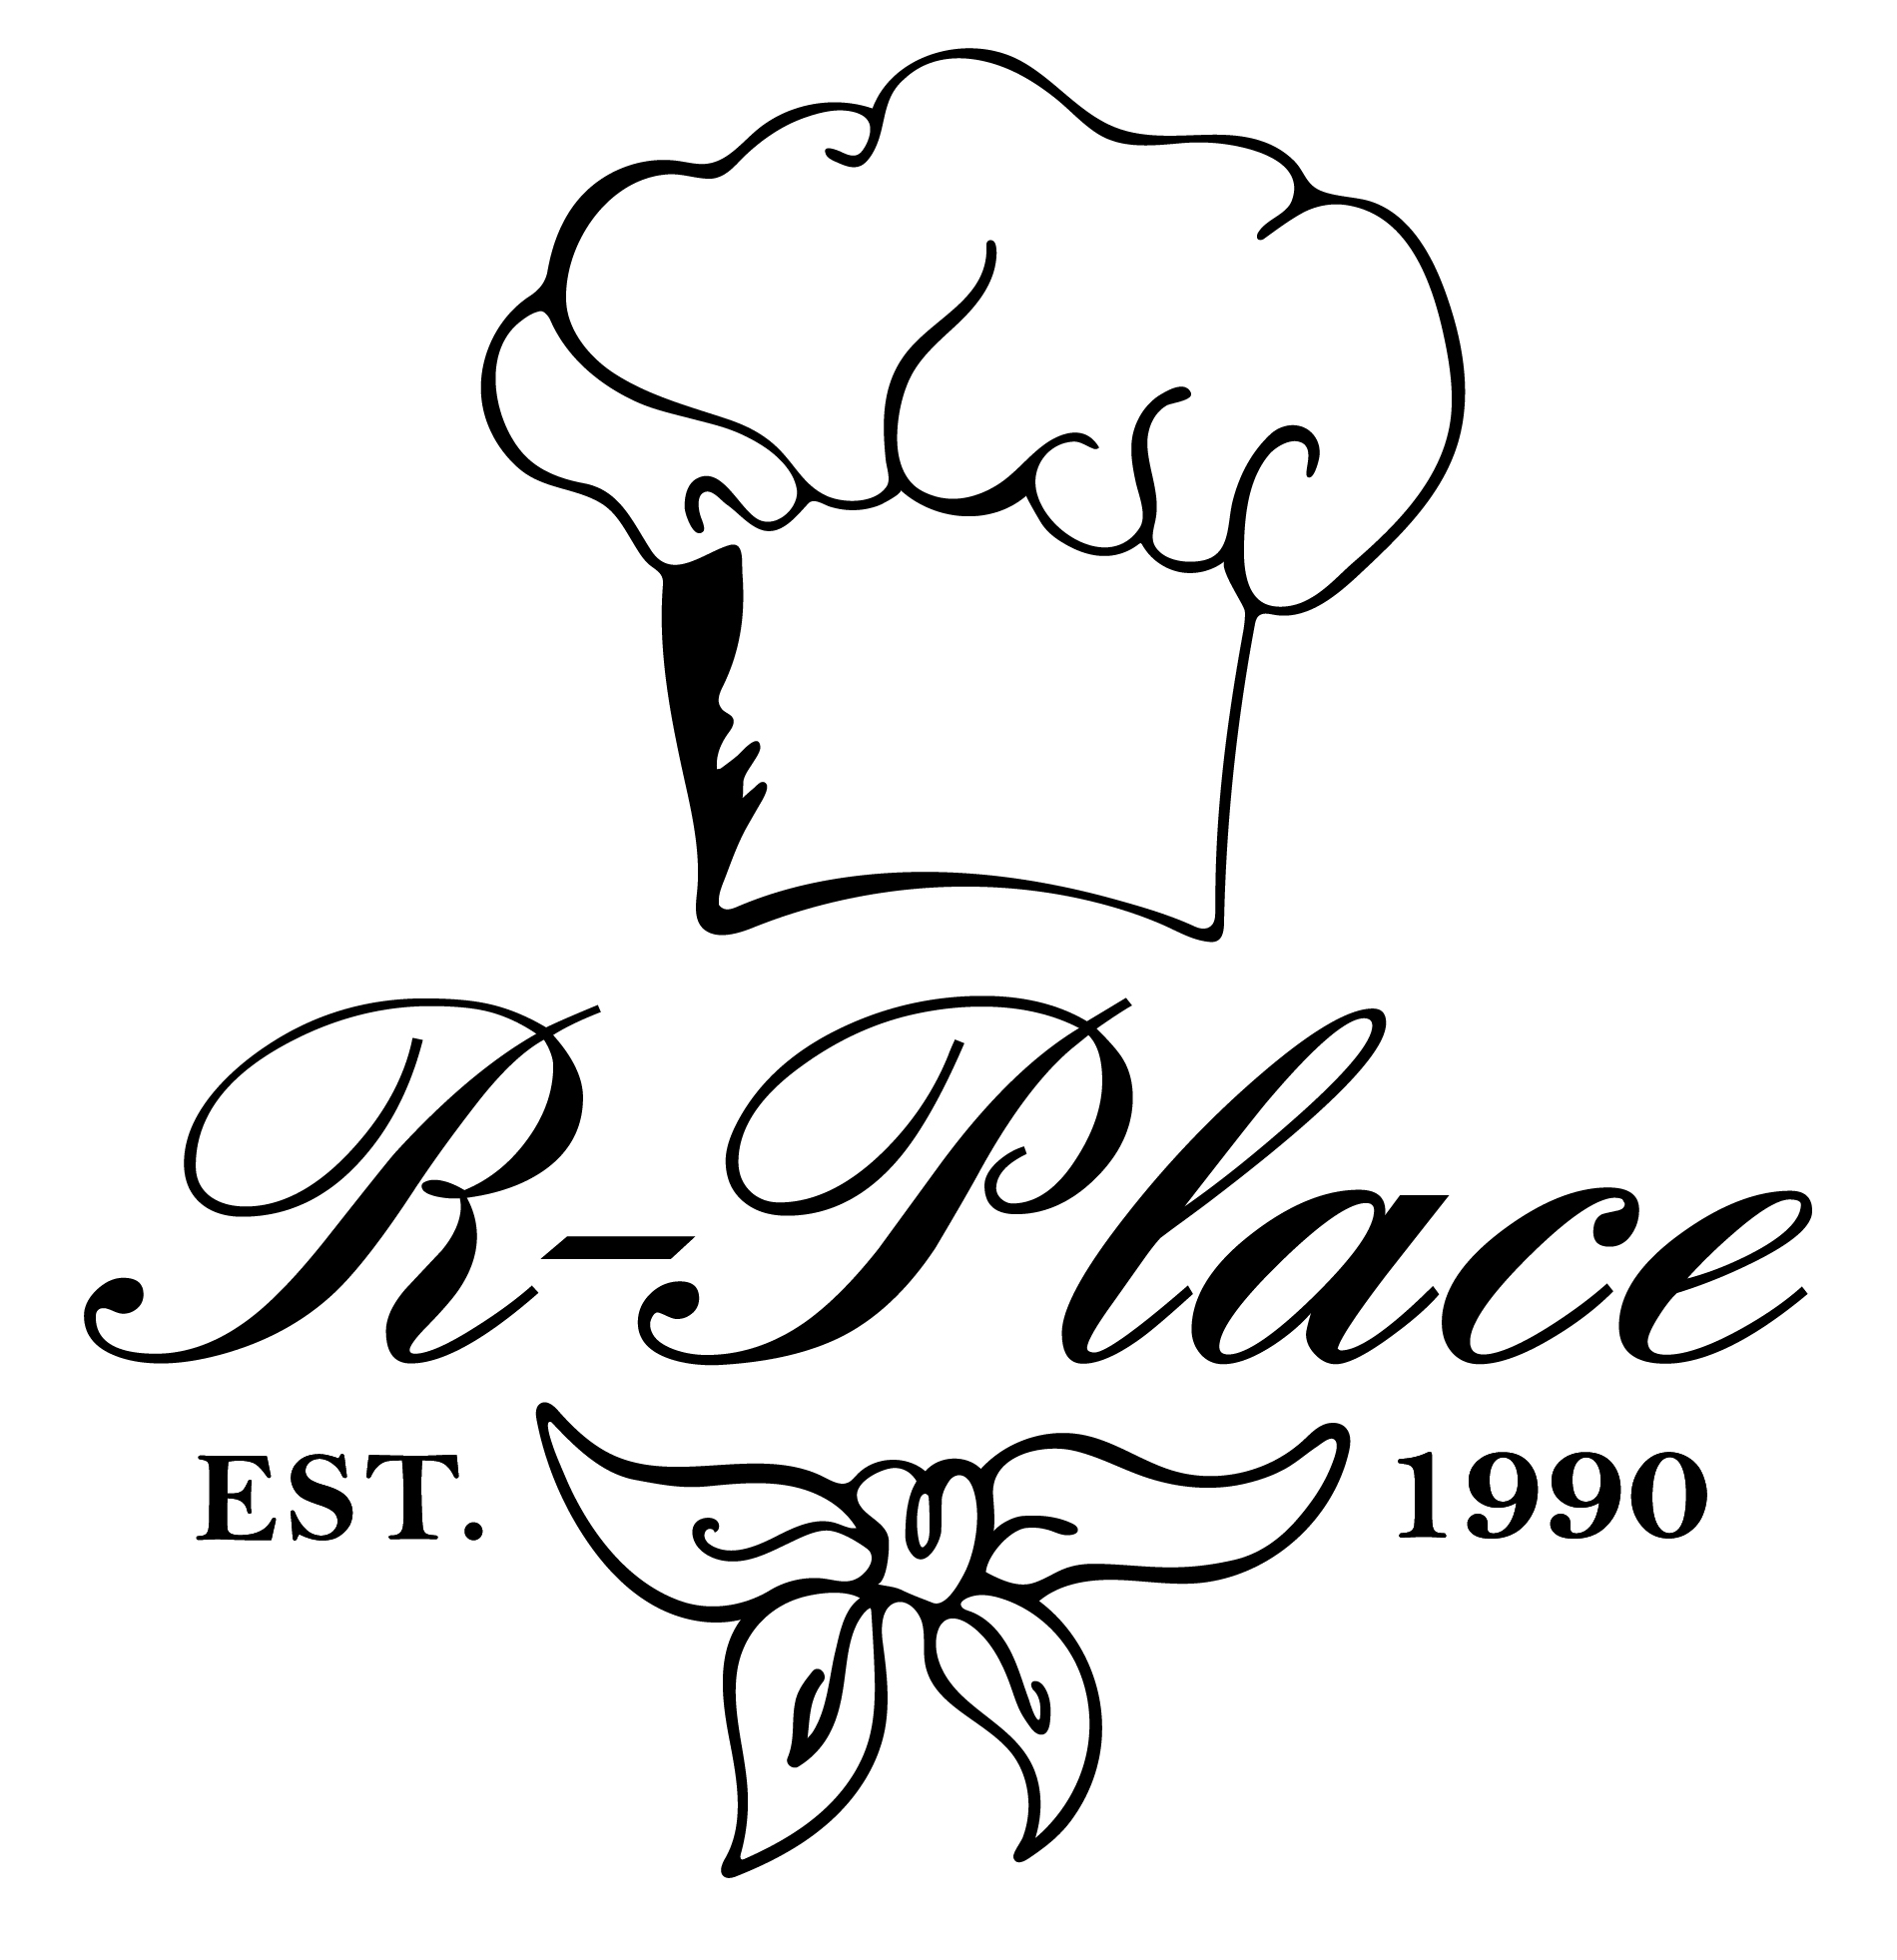 R-Place Restaurant, Catering & Bakery